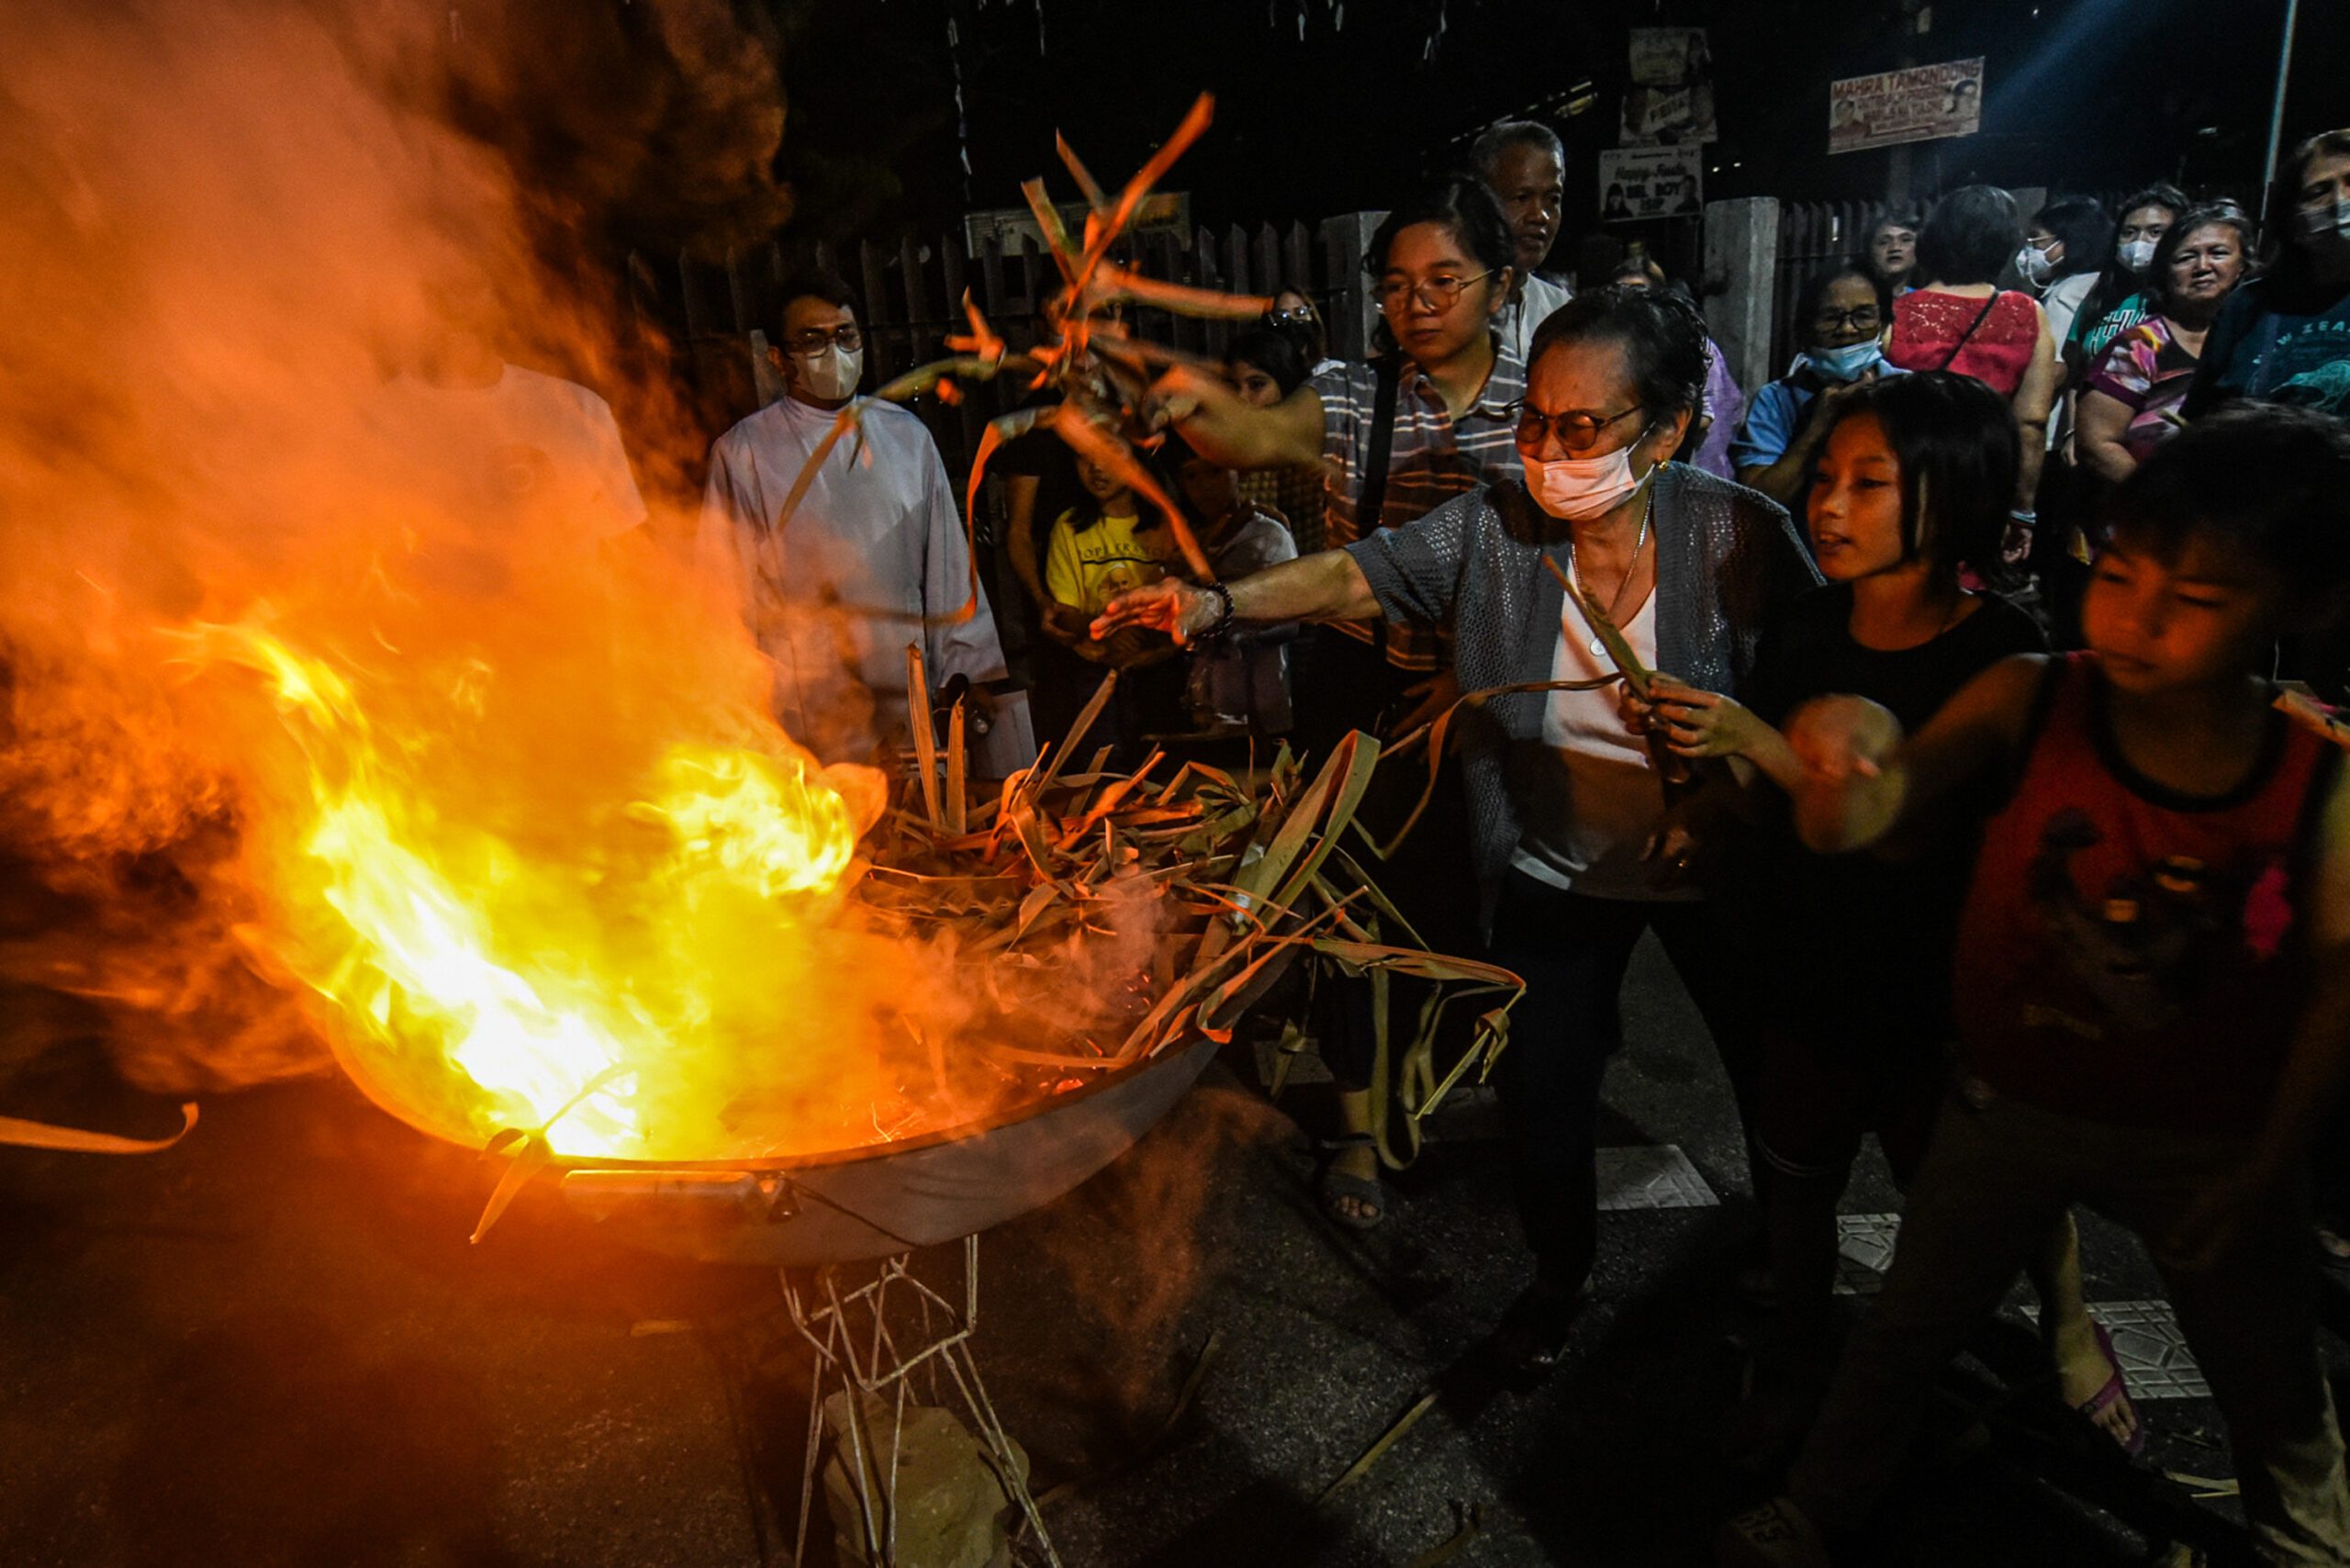 IN PHOTOS: From Palm Sunday ‘palaspas’ to Ash Wednesday ashes